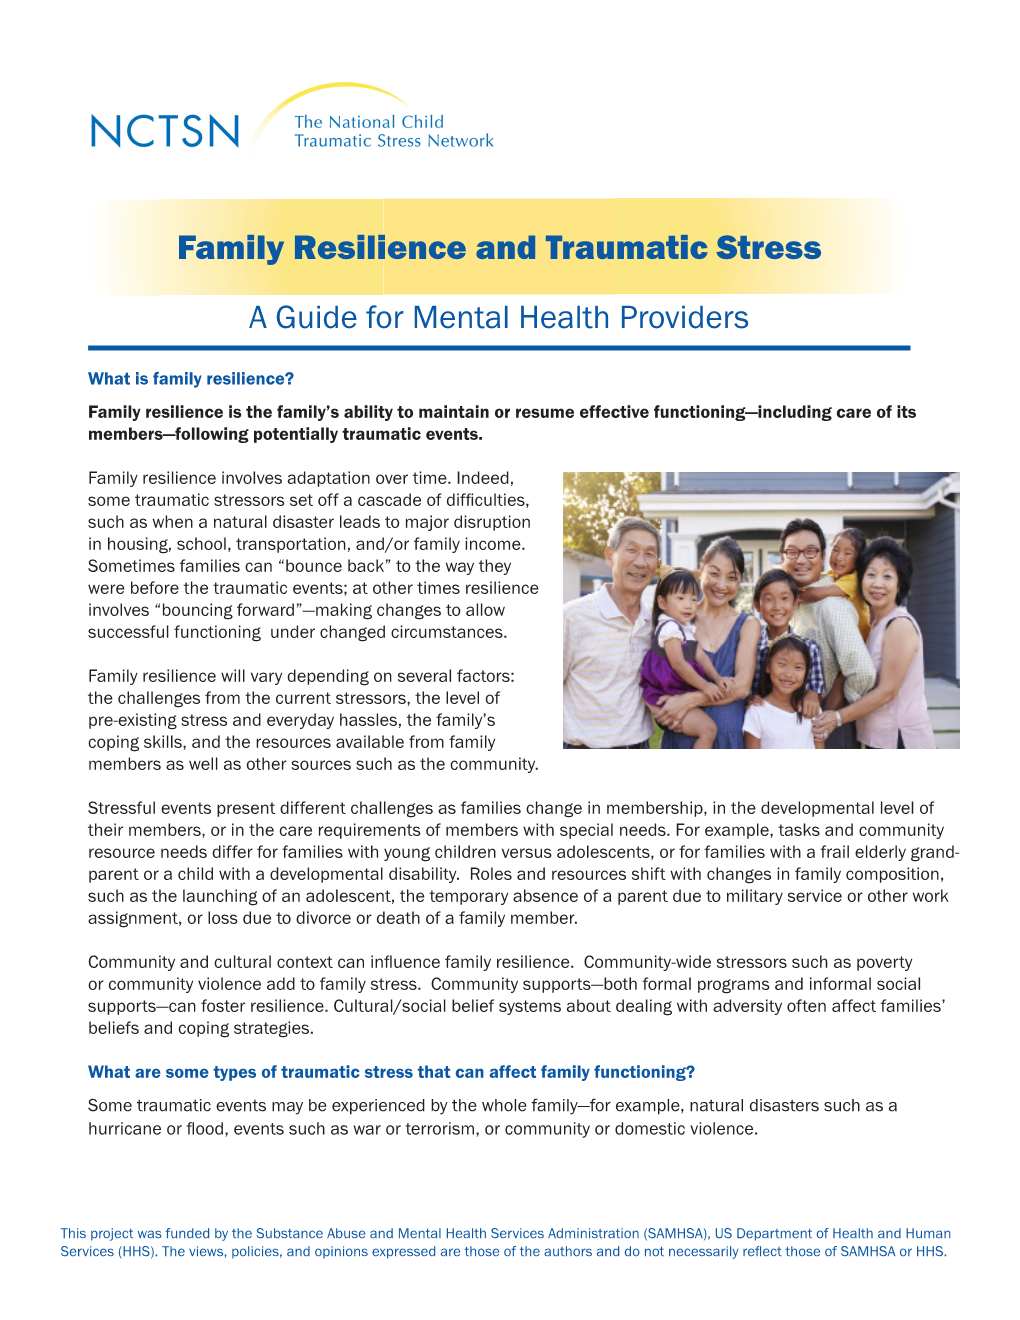 Family Resilience and Traumatic Stress